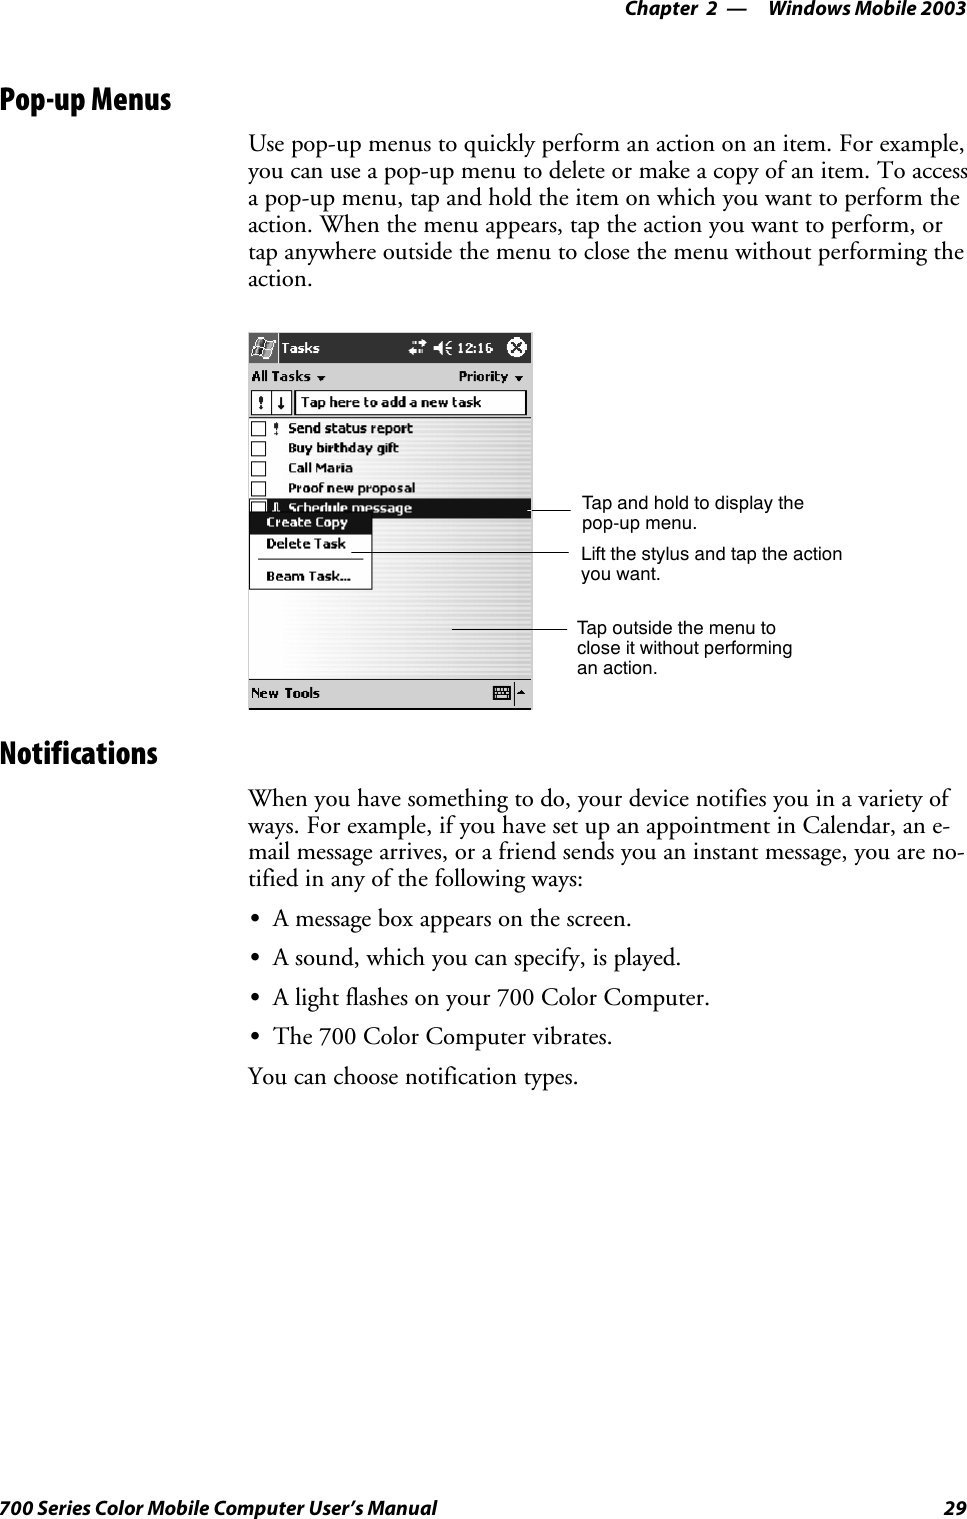 Windows Mobile 2003—Chapter 229700 Series Color Mobile Computer User’s ManualPop-up MenusUse pop-up menus to quickly perform an action on an item. For example,you can use a pop-up menu to delete or make a copy of an item. To accessa pop-up menu, tap and hold the item on which you want to perform theaction. When the menu appears, tap the action you want to perform, ortap anywhere outside the menu to close the menu without performing theaction.Tap and hold to display thepop-up menu.Lift the stylus and tap the actionyou want.Tap outside the menu toclose it without performingan action.NotificationsWhen you have something to do, your device notifies you in a variety ofways. For example, if you have set up an appointment in Calendar, an e-mail message arrives, or a friend sends you an instant message, you are no-tified in any of the following ways:SA message box appears on the screen.SA sound, which you can specify, is played.SA light flashes on your 700 Color Computer.SThe700ColorComputervibrates.You can choose notification types.